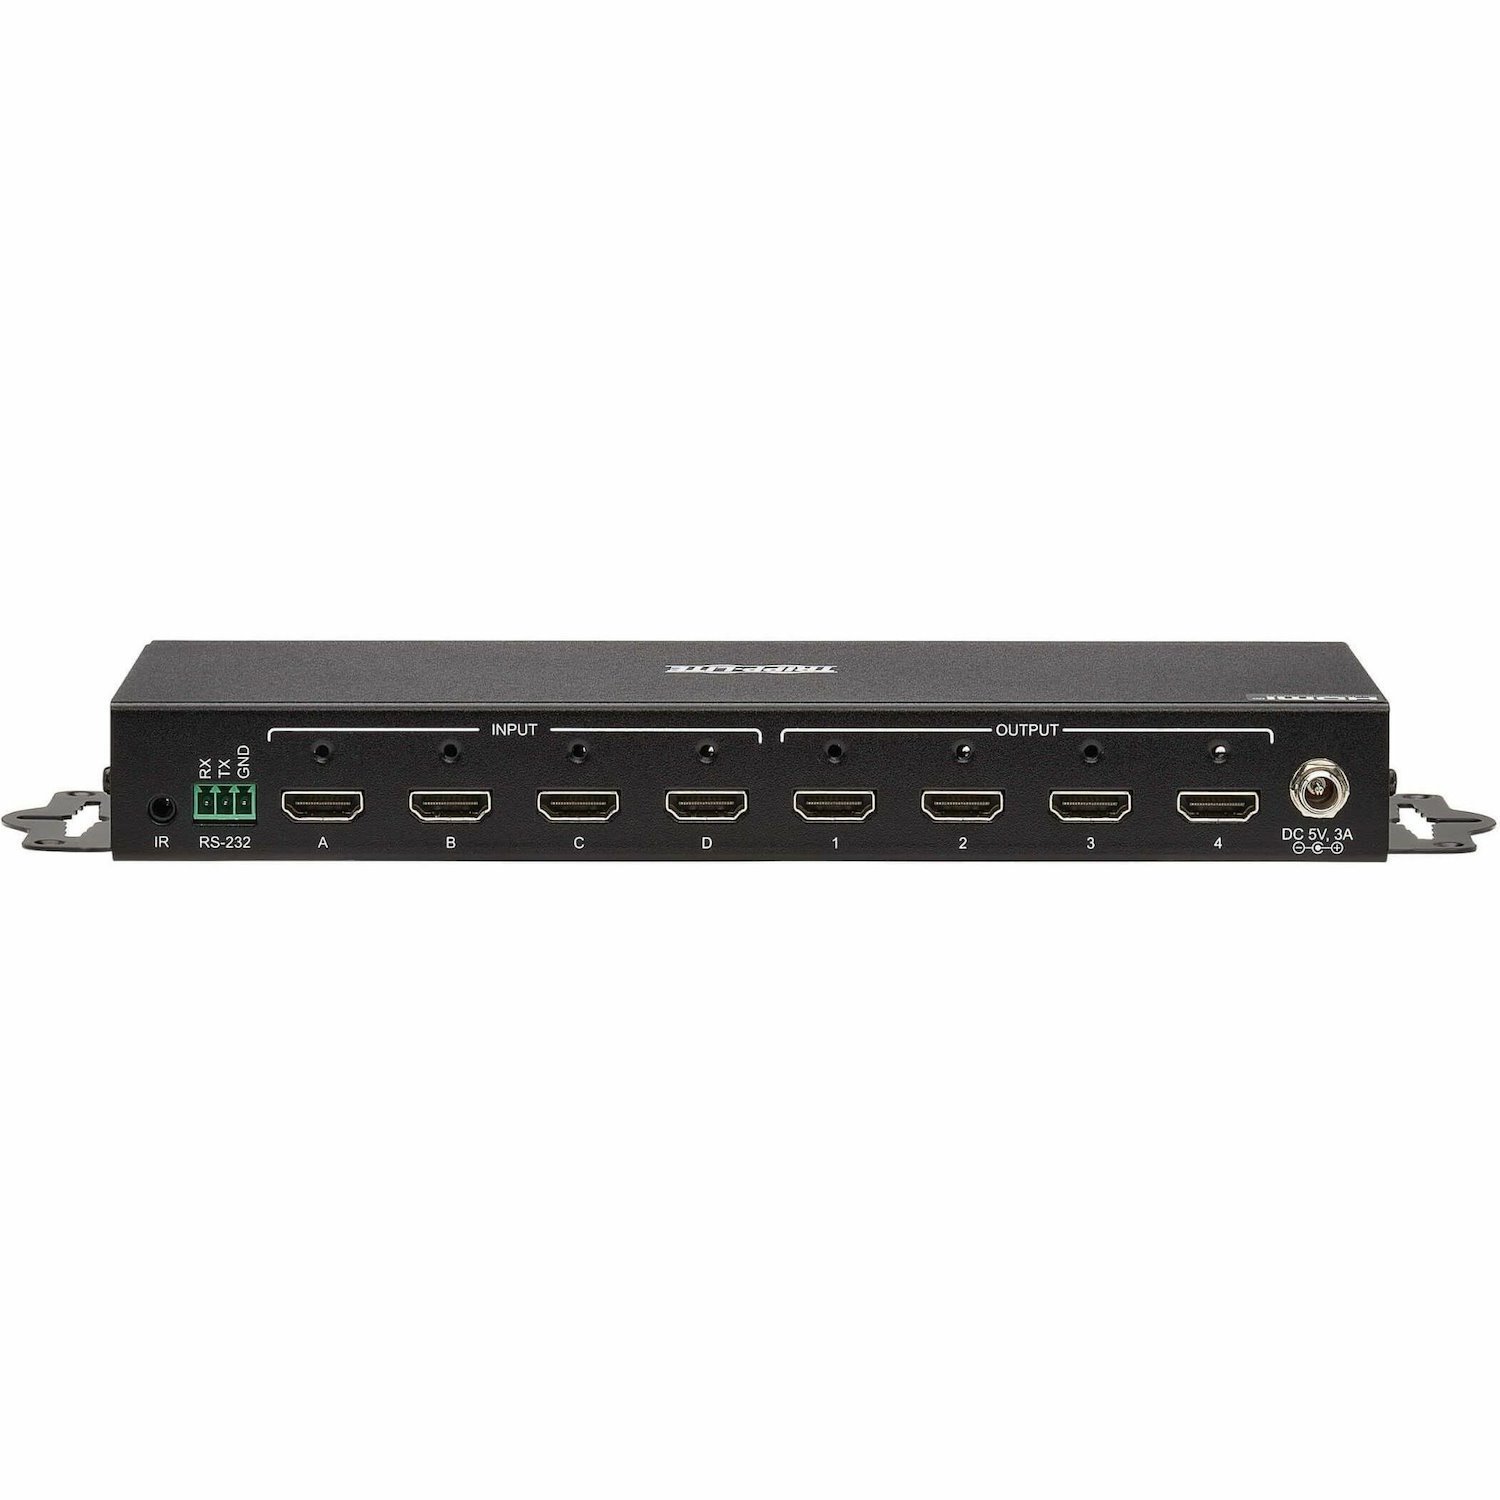 Tripp Lite by Eaton 4x4 HDMI Matrix Switch/Splitter with Remote Control and Multi-Resolution Support, 4K 60 Hz, HDR, 4:4:4, TAA